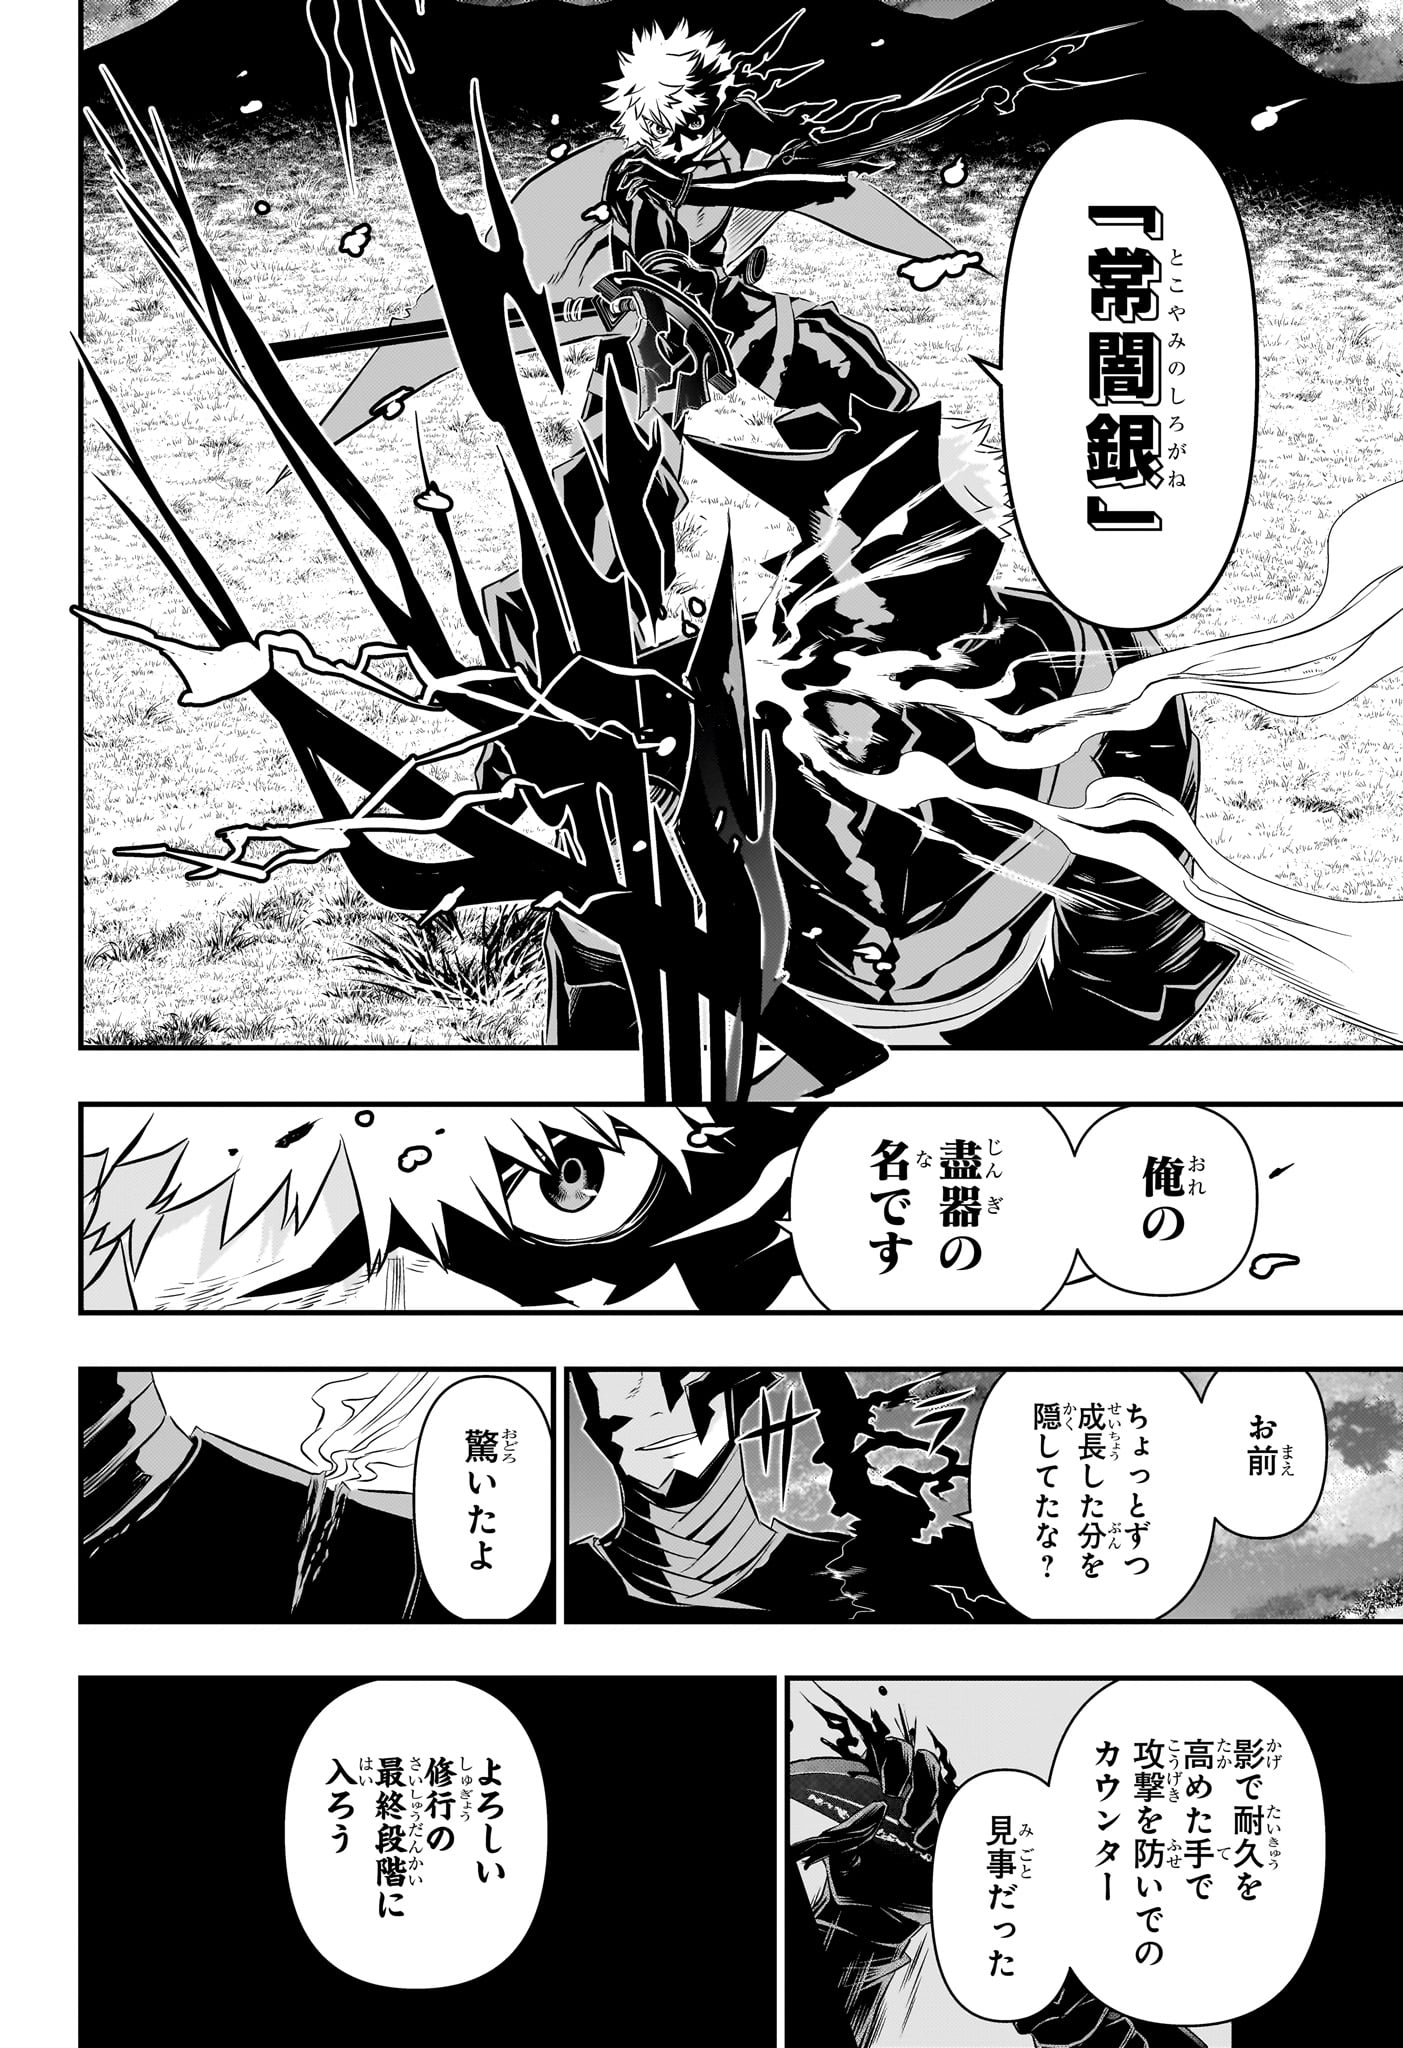 Nue no Onmyouji - Chapter 49 - Page 18